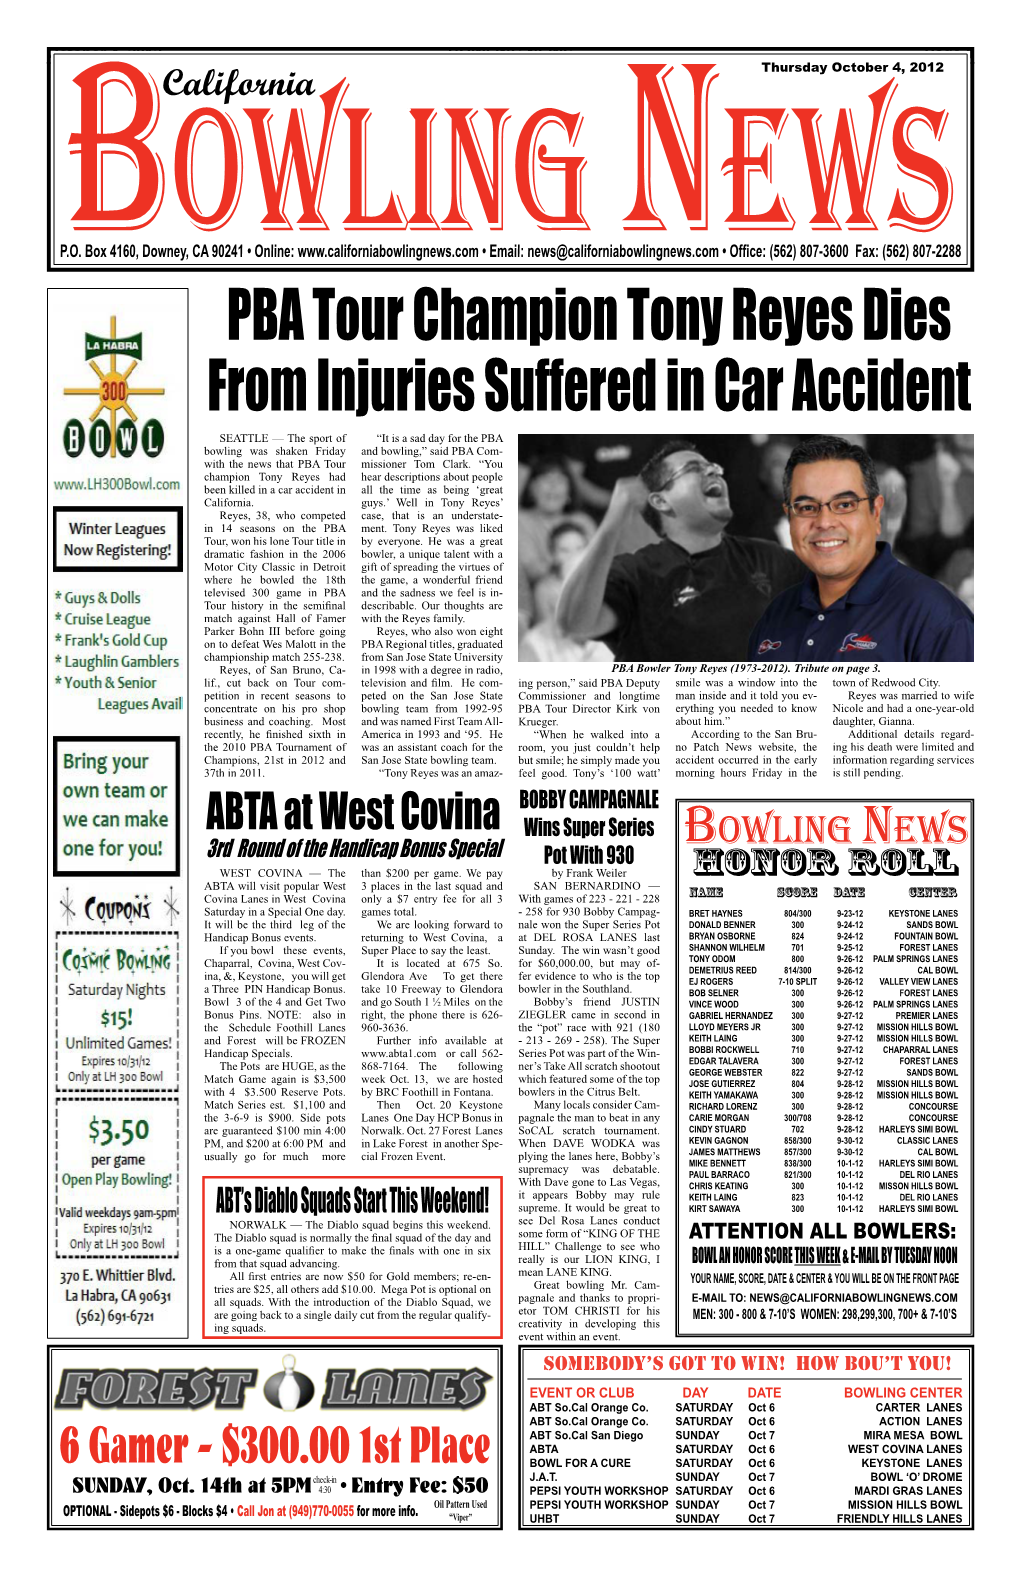 Pba Tour Champion Tony Reyes Dies from Injuries Suffered in Car Accident